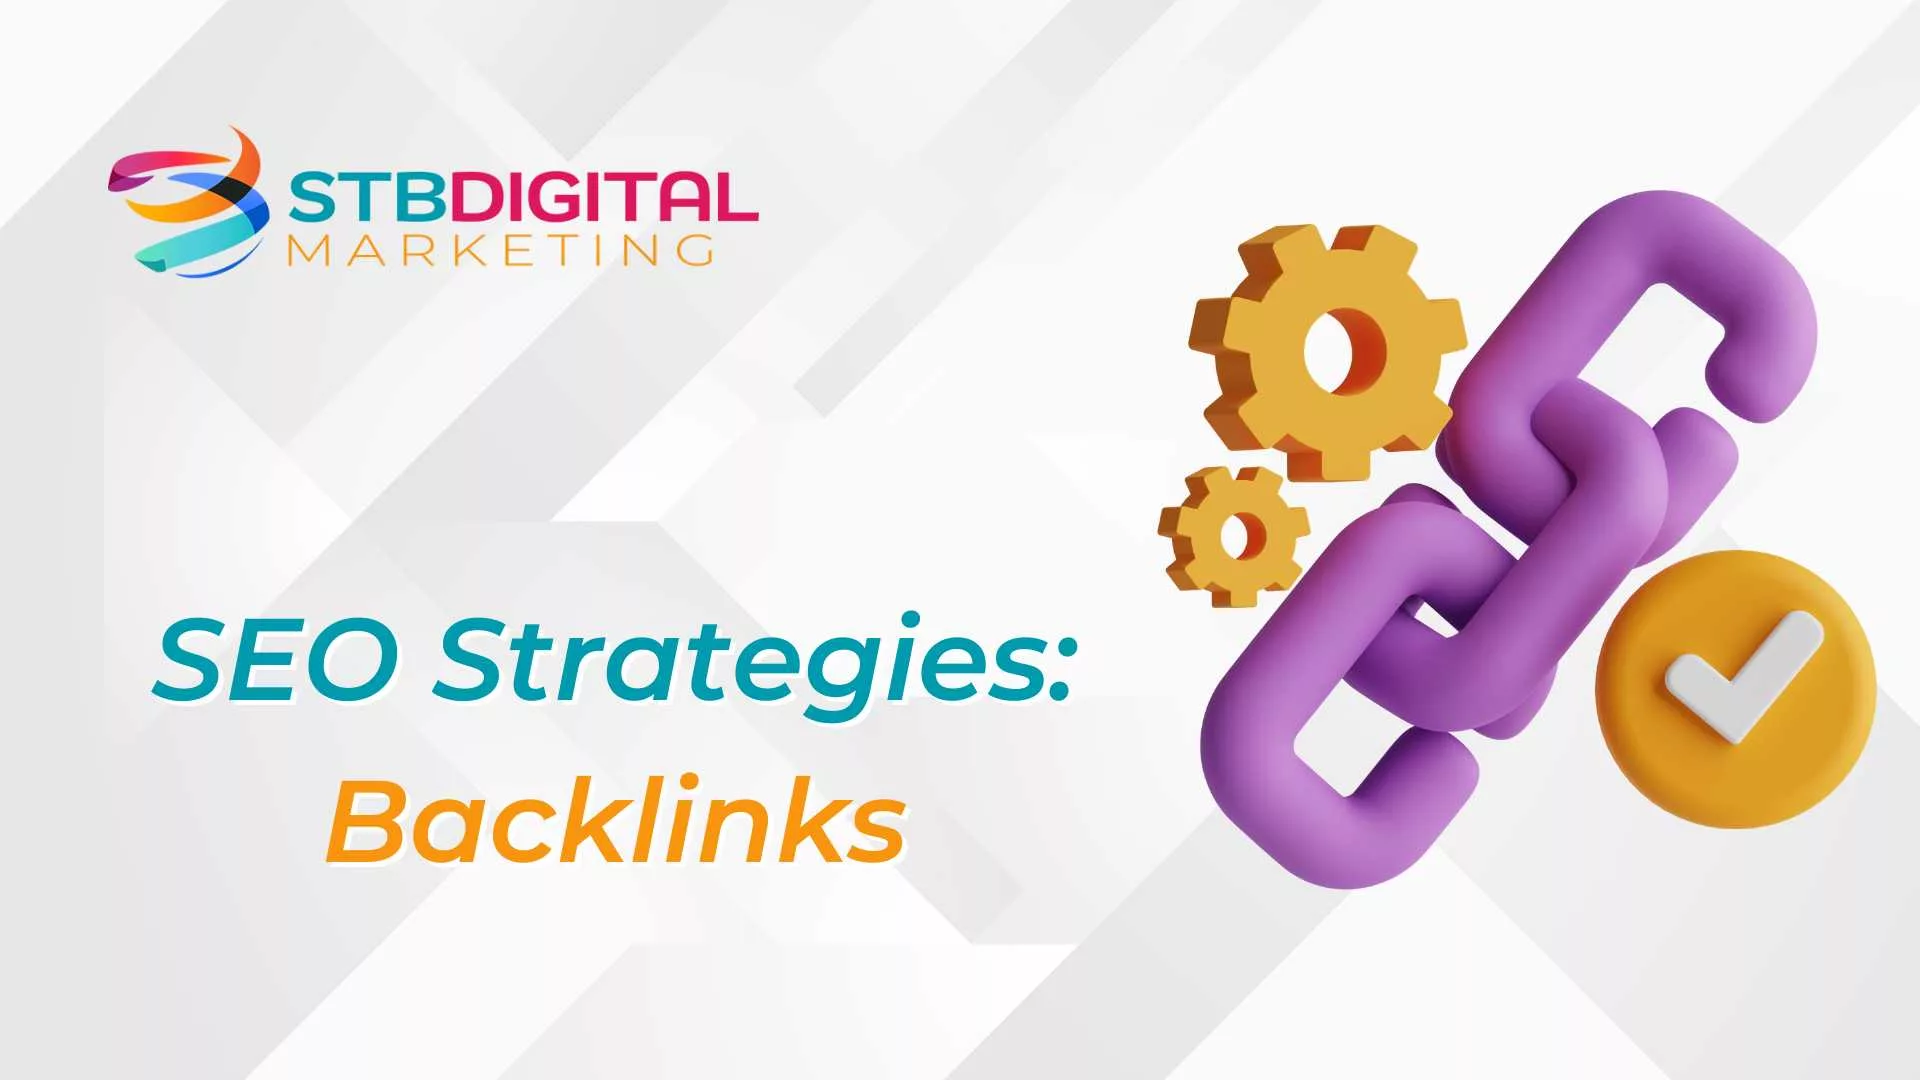 STBDigital Marketing logo with the title 'SEO Strategies: Backlinks' alongside imagery of gears and a chain link with a check mark.